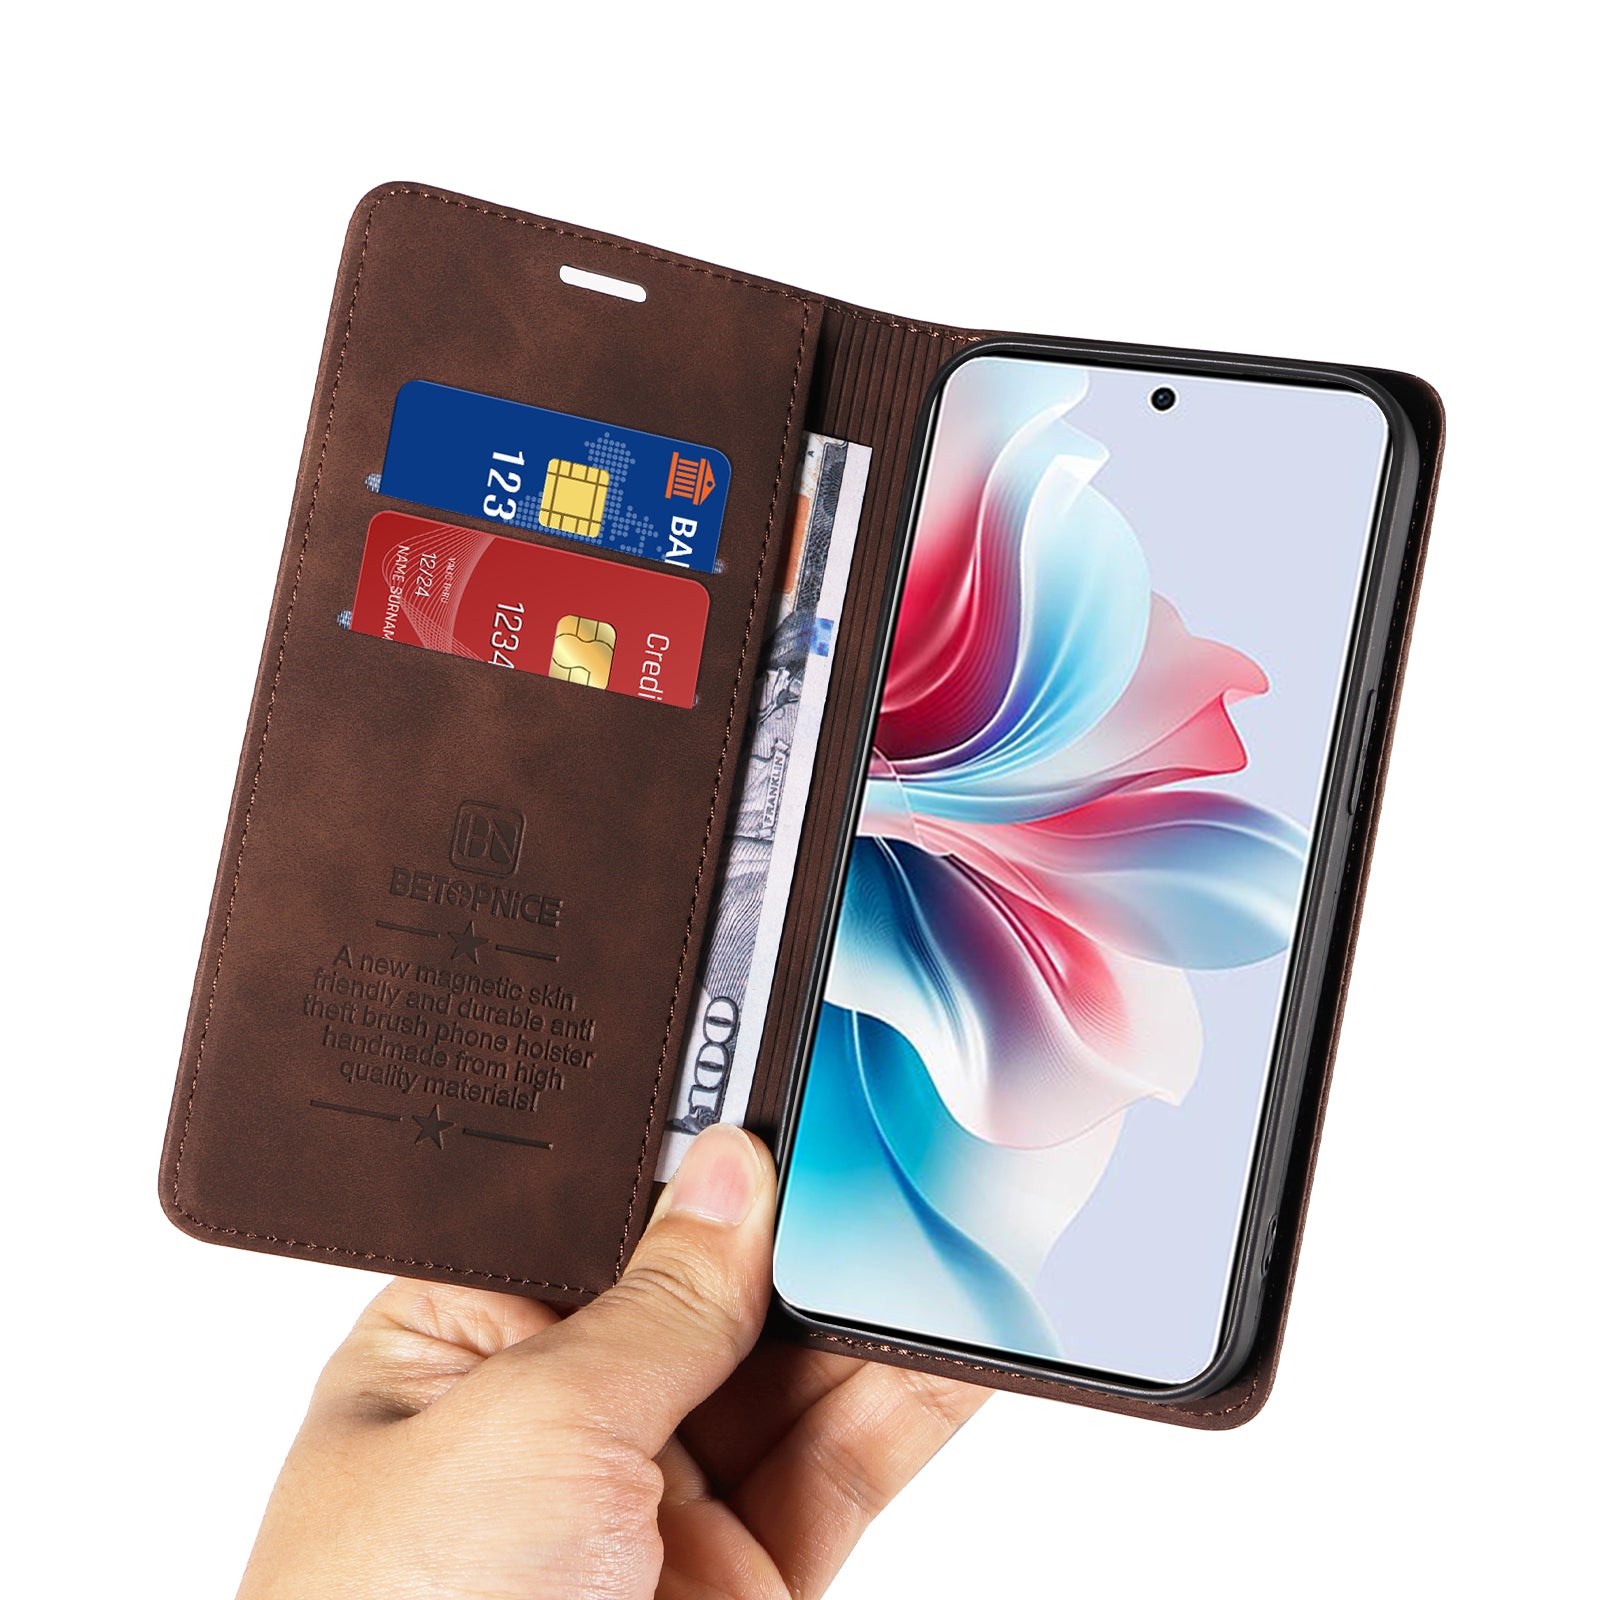 BETOPNICE 003 For Oppo Reno11 F 5G / F25 Pro 5G Case RFID Blocking Leather+TPU Wallet Phone Protector - Brown